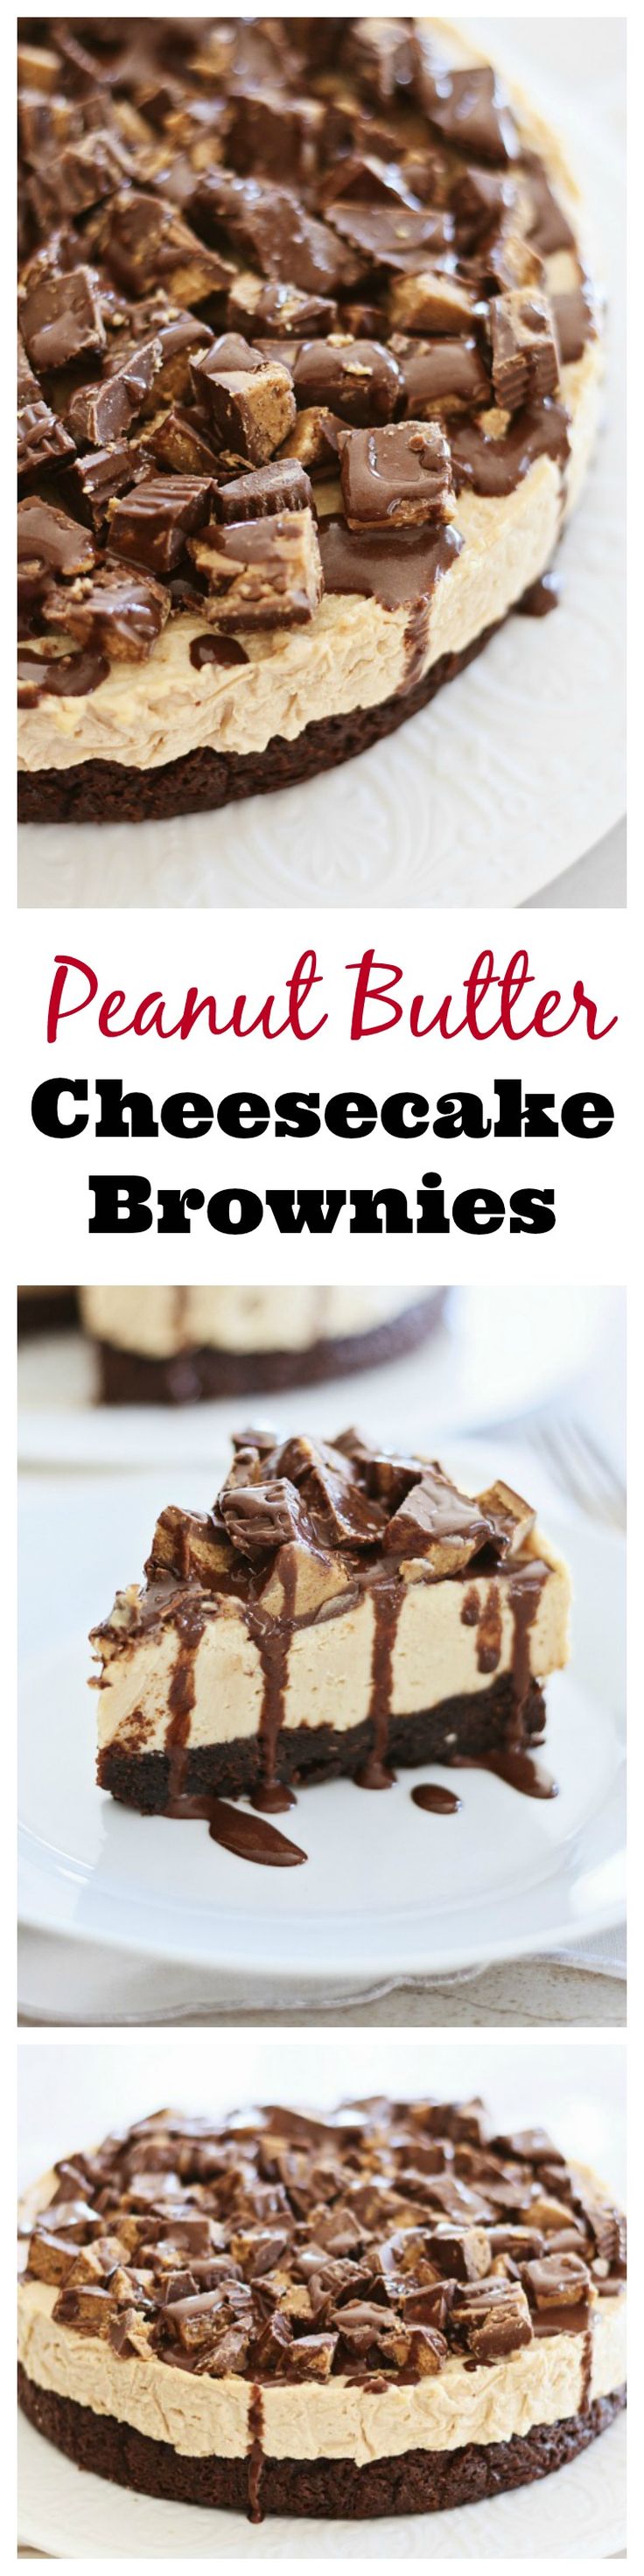 Combine three of the best sweet things into one: peanut butter, cheesecake, and brownies. DECADENT and to-die-for dessert | rasamalaysia.com